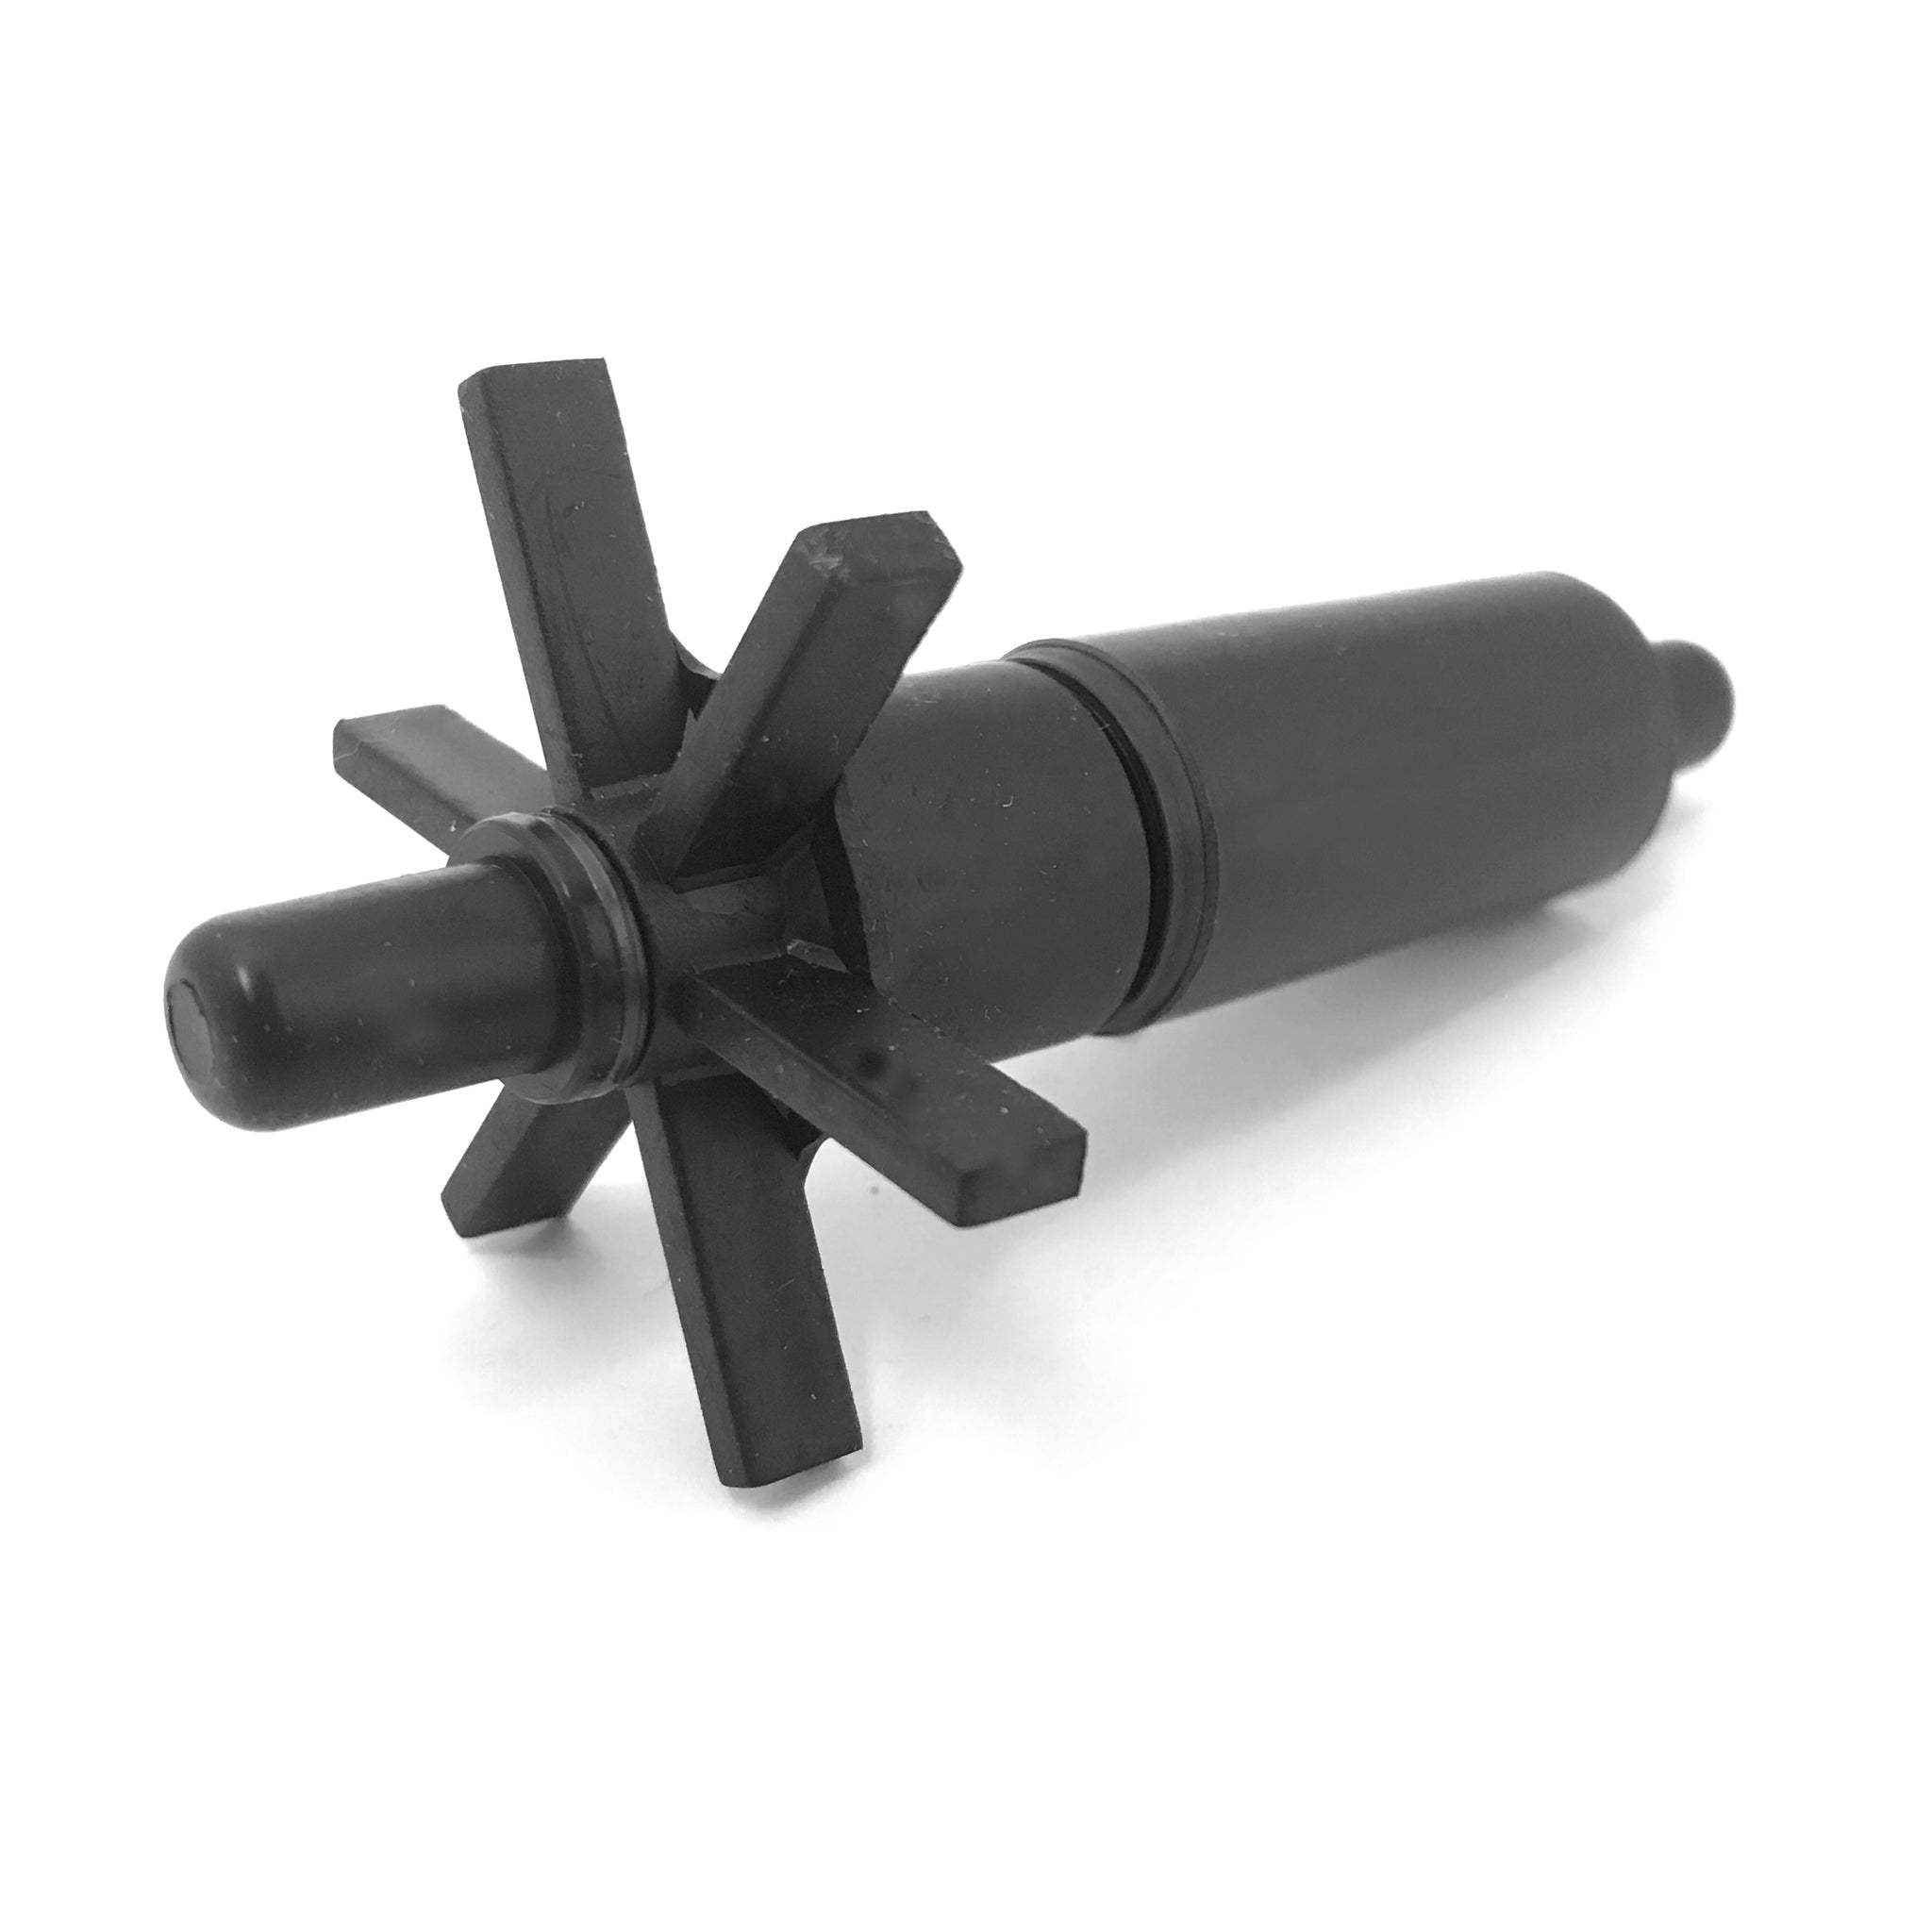 Replacement Impeller for Model 9.5 02710, 02720 or 40129